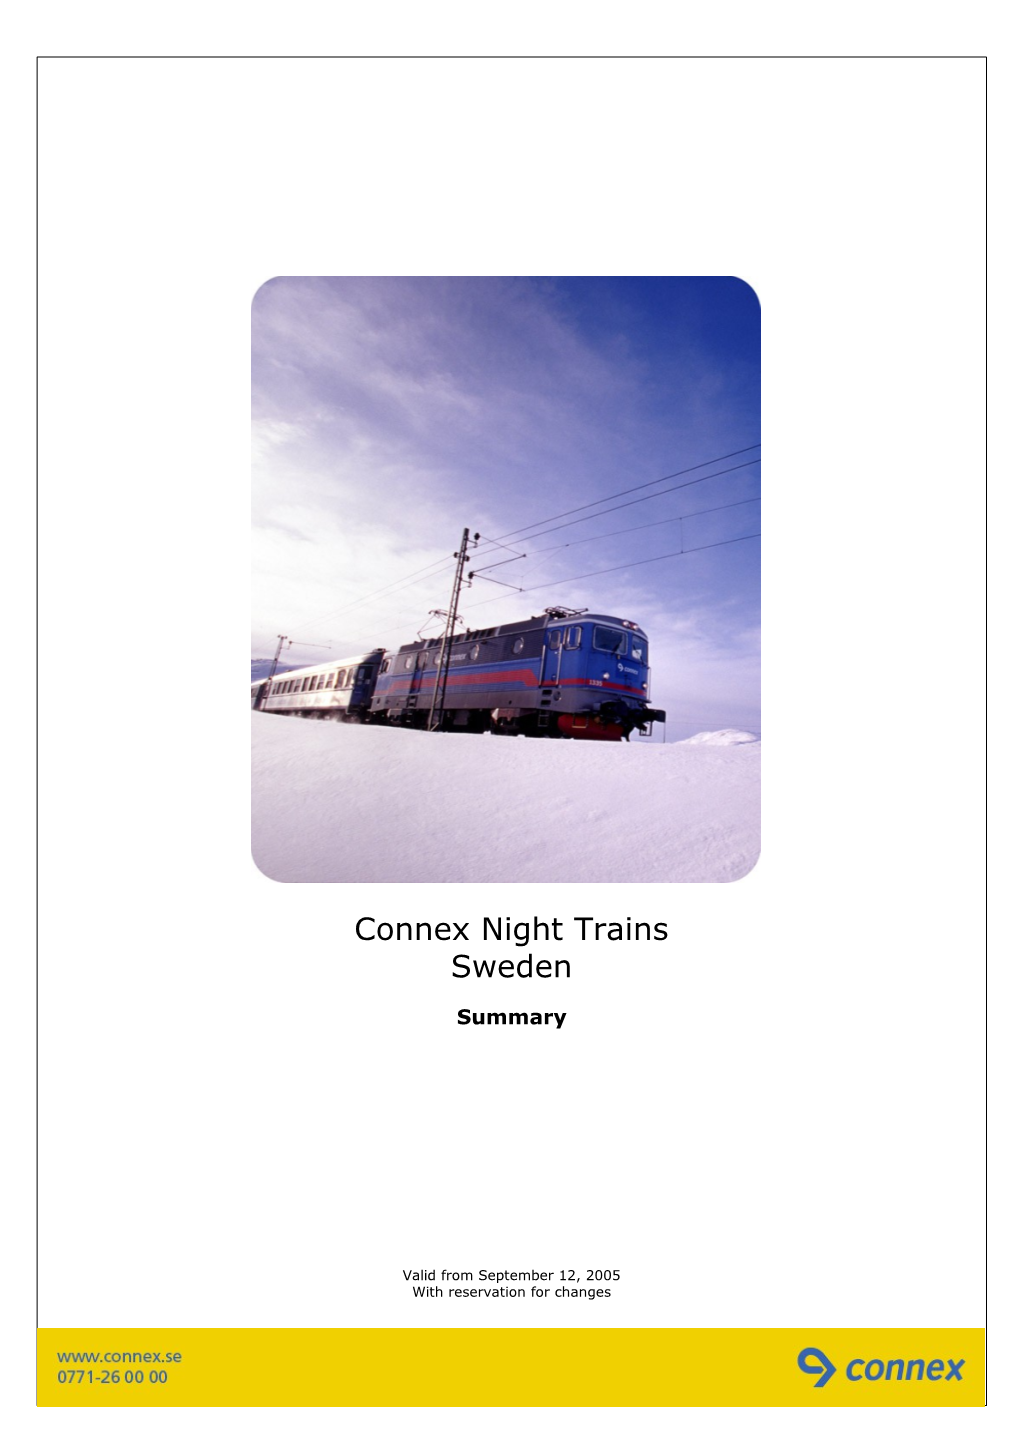 1.1 Cities Served by Connex Night Trains 3